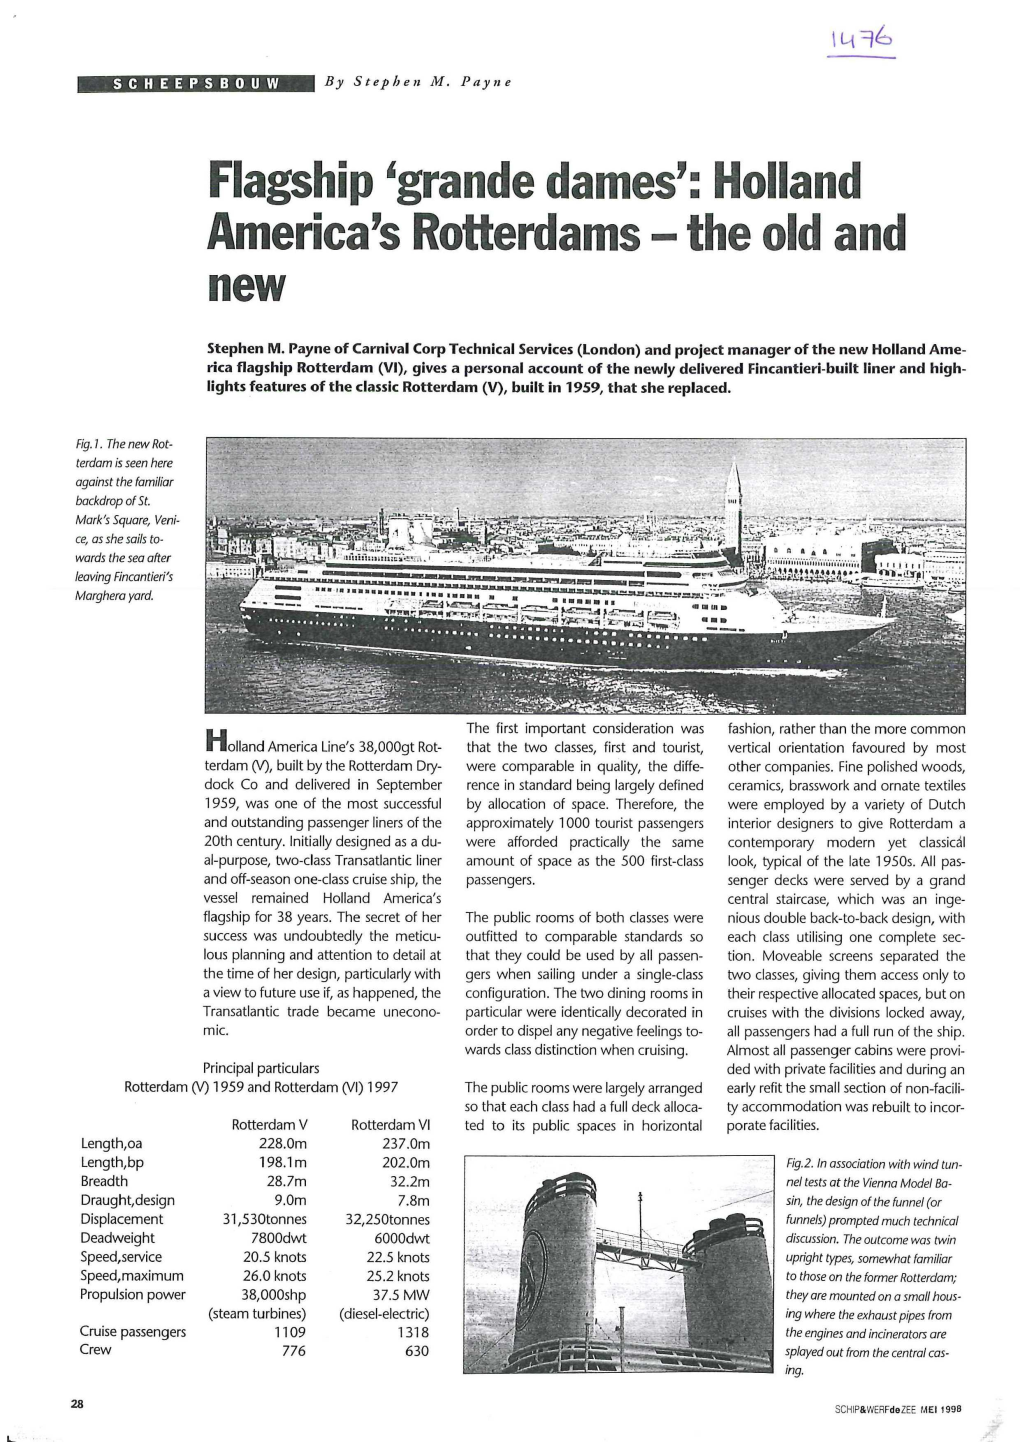 'Grande Dames': Holland America's Rotterdams - the Old and New